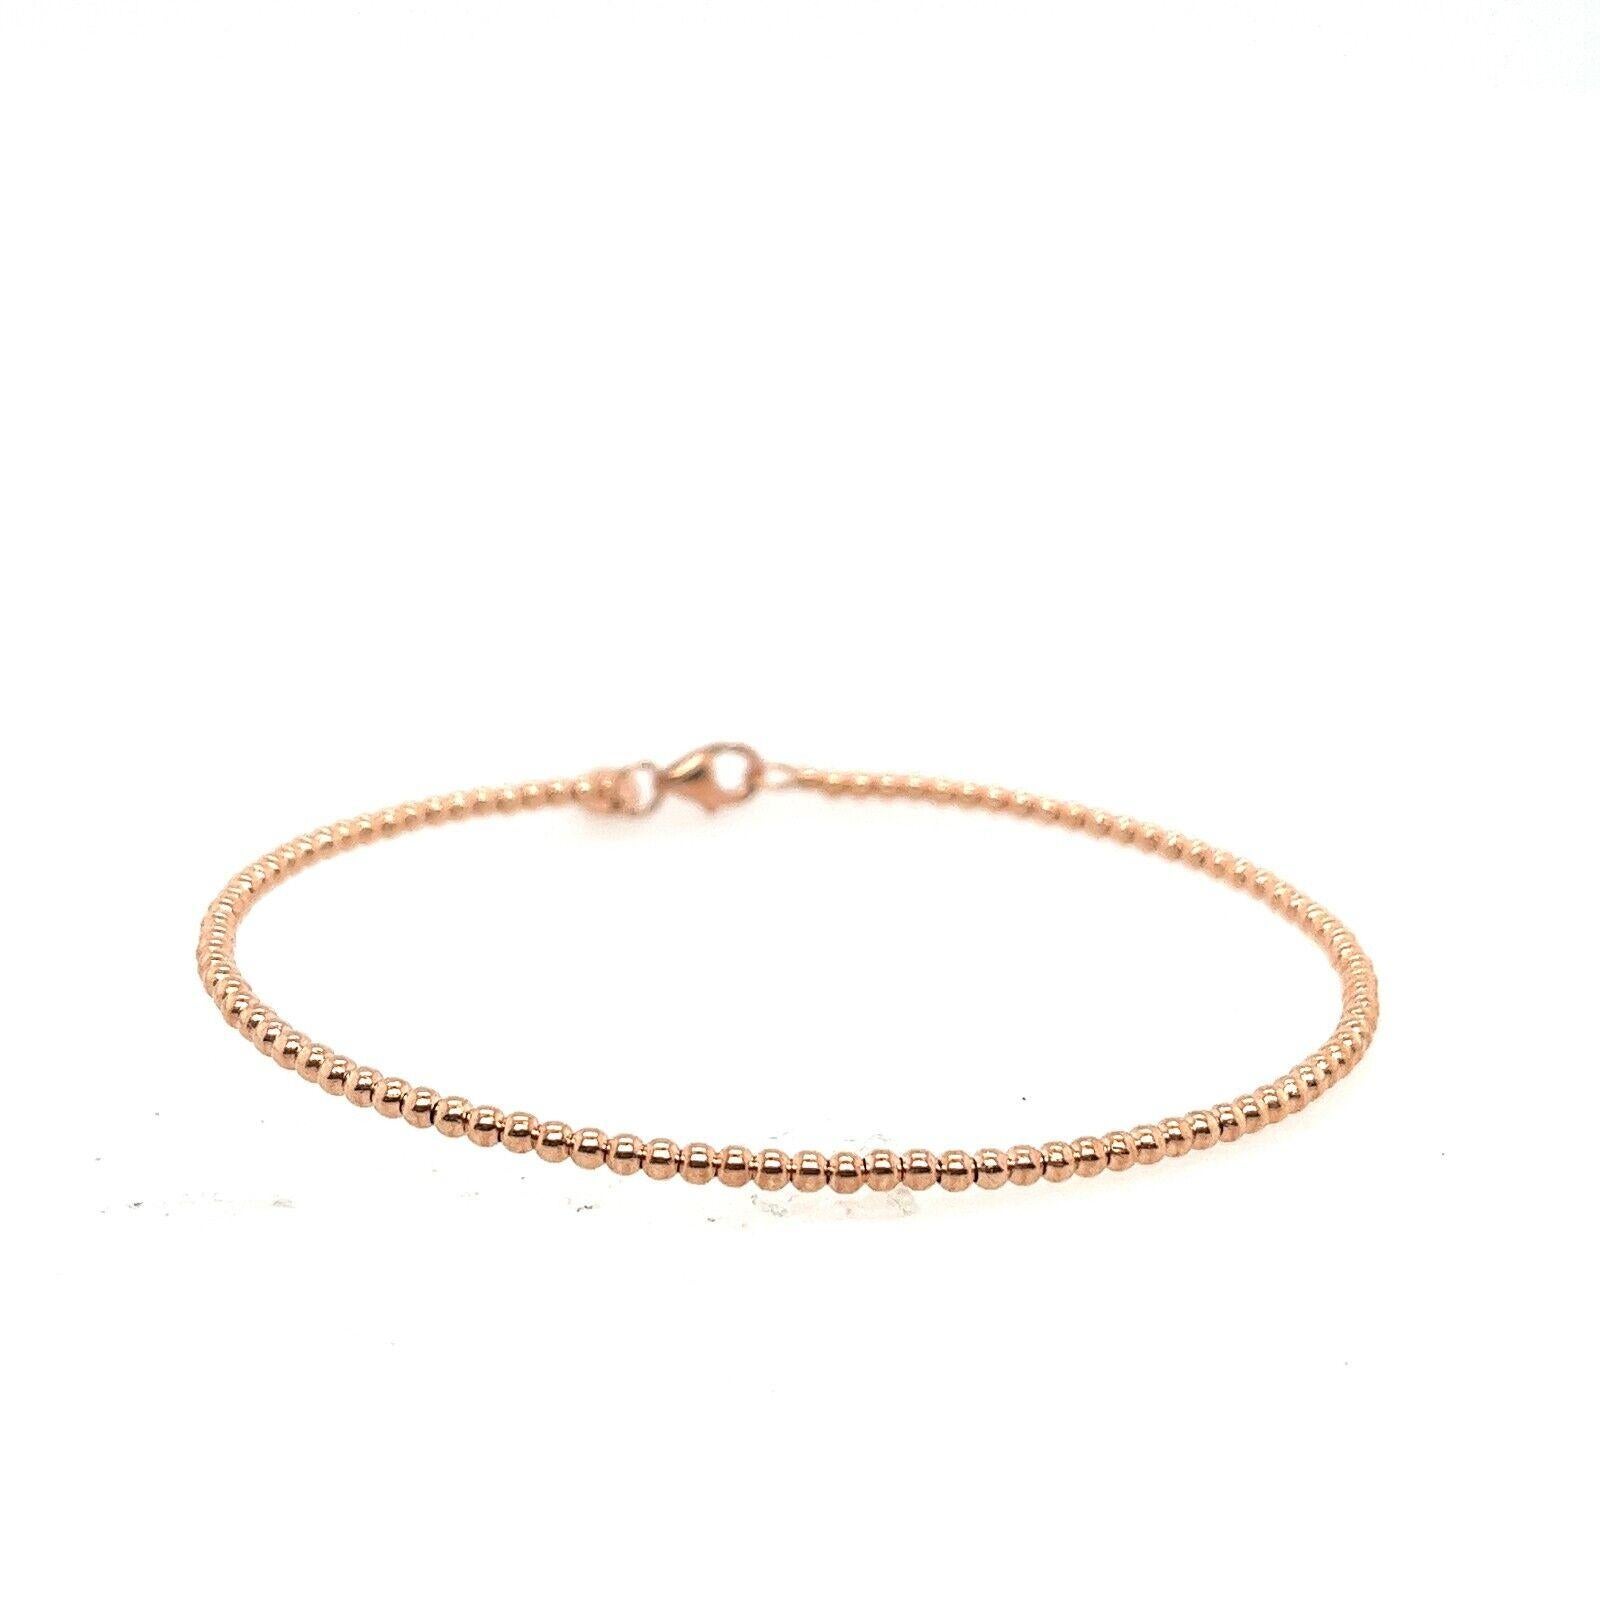 14ct Rose Gold Bead Oval Bangle with a stunningly delicate 2mm width, 
designed to adorn your wrist with elegance and grace.

Additional Information:
Total Weight: 2.5g
Closure: Lobster
Item Dimensions:6.2mm x 5mm
SMS8616